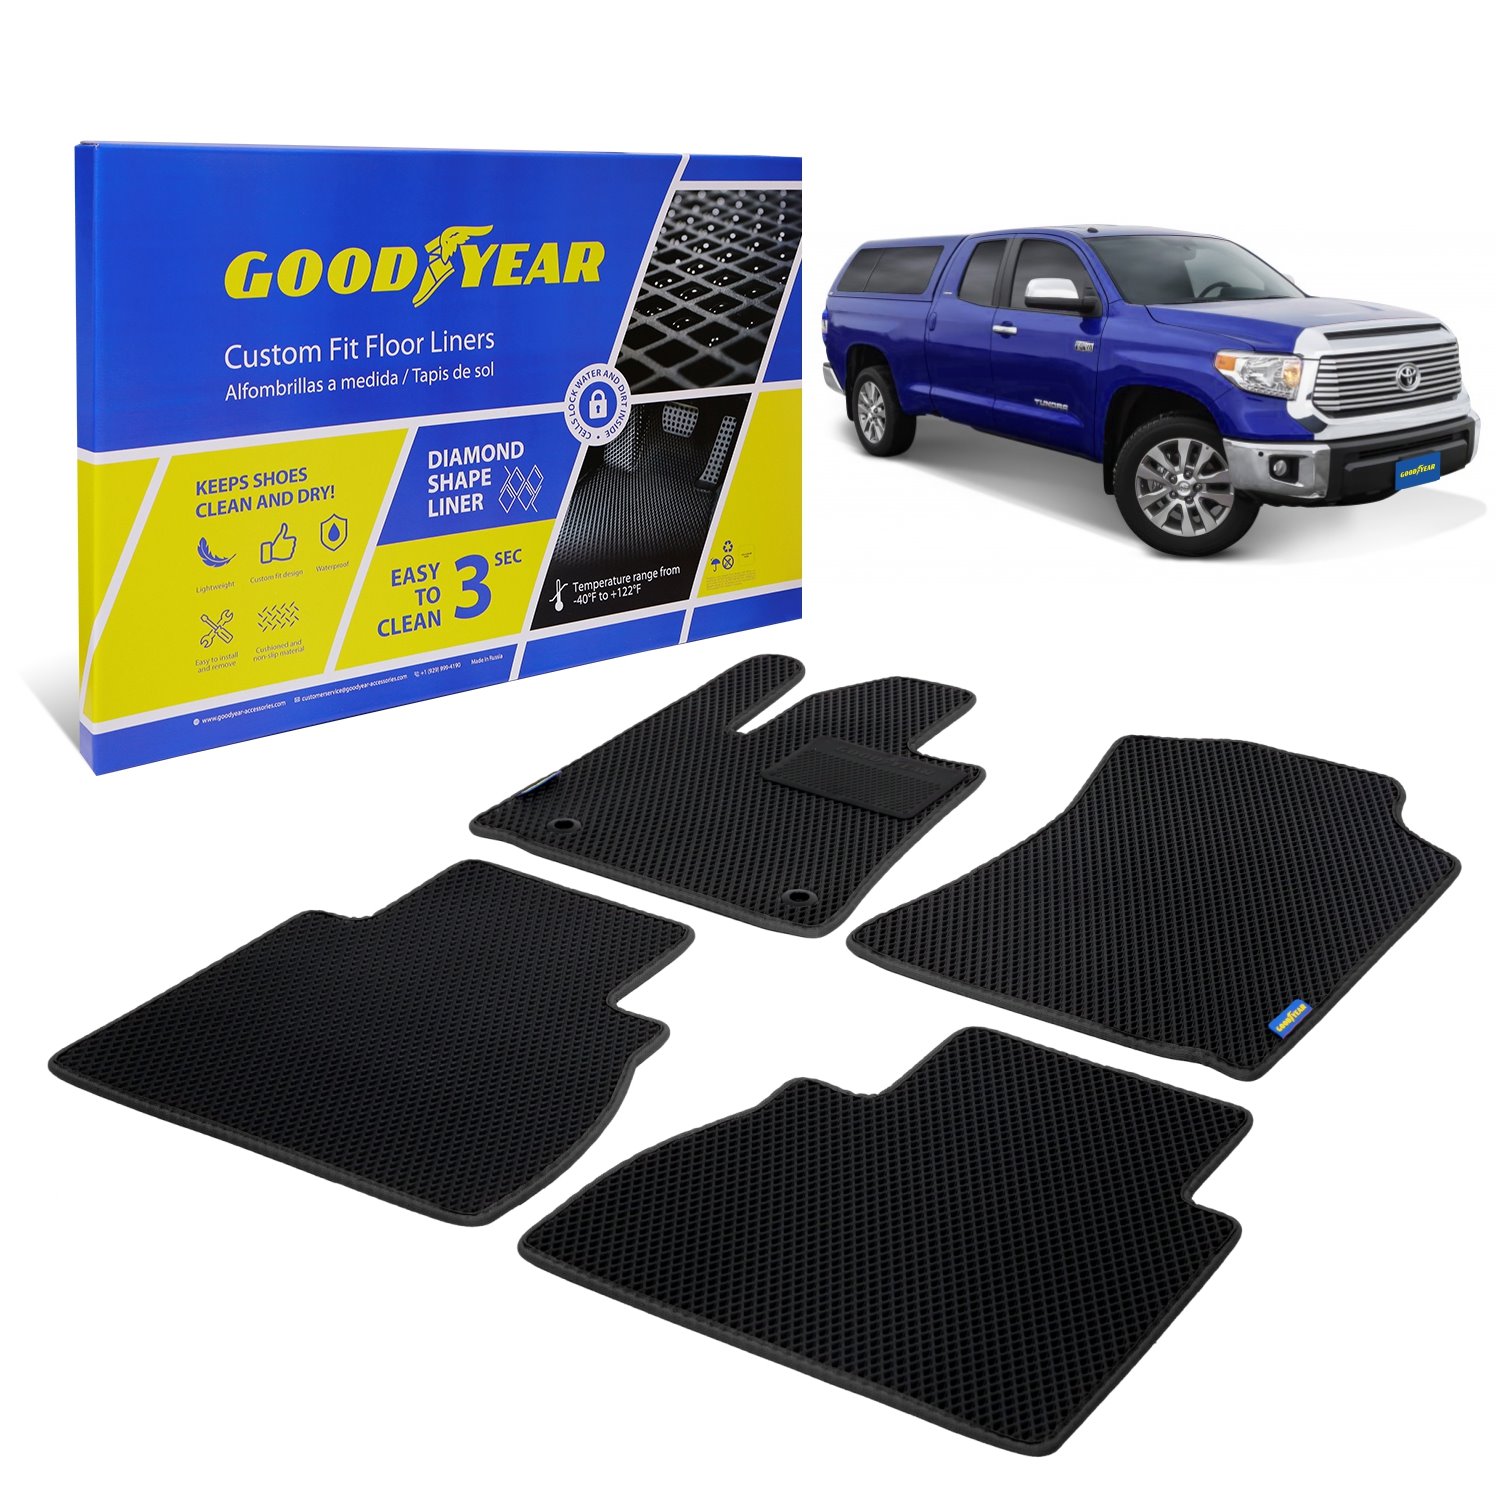 Goodyear Custom-Fit Floor Liners Fits Select Toyota Tundra